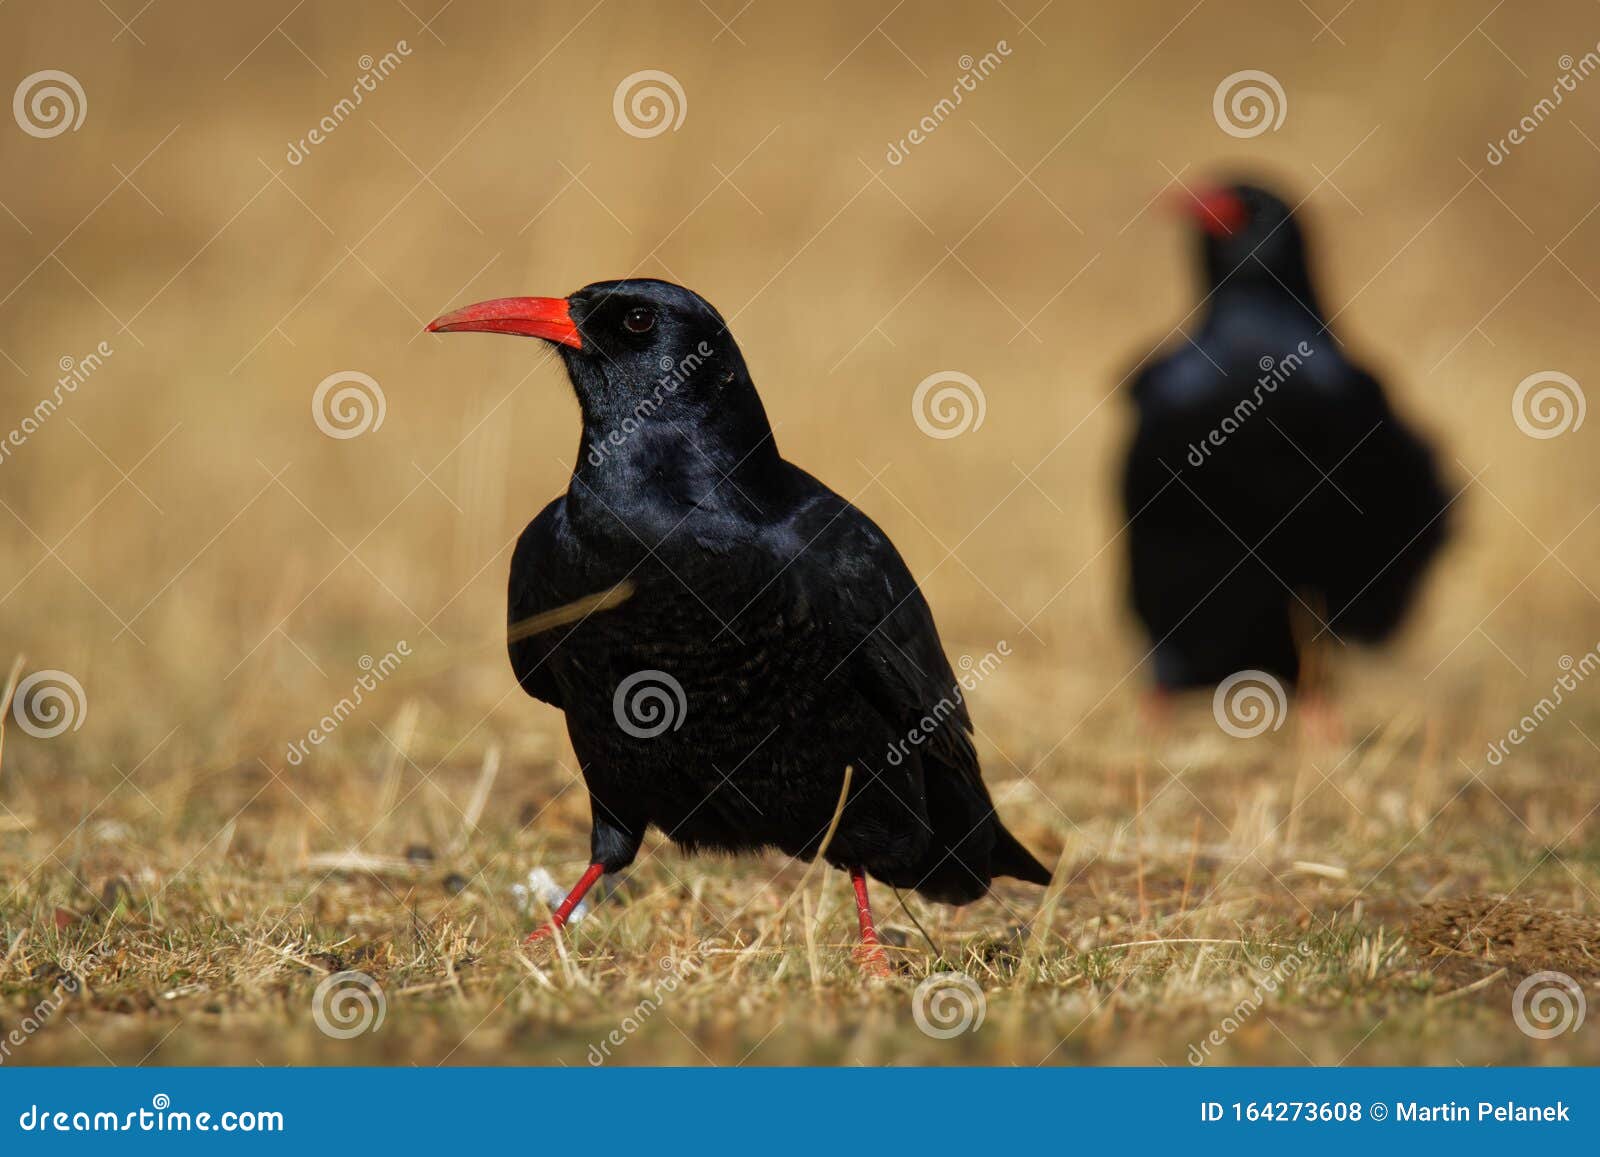 Red-billed Chough - Pyrrhocorax Pyrrhocorax, Cornish Chough or Simply  Chough is a Black Bird with the Red Beak in the Crow Family Stock Photo -  Image of daytime, bird: 164273608